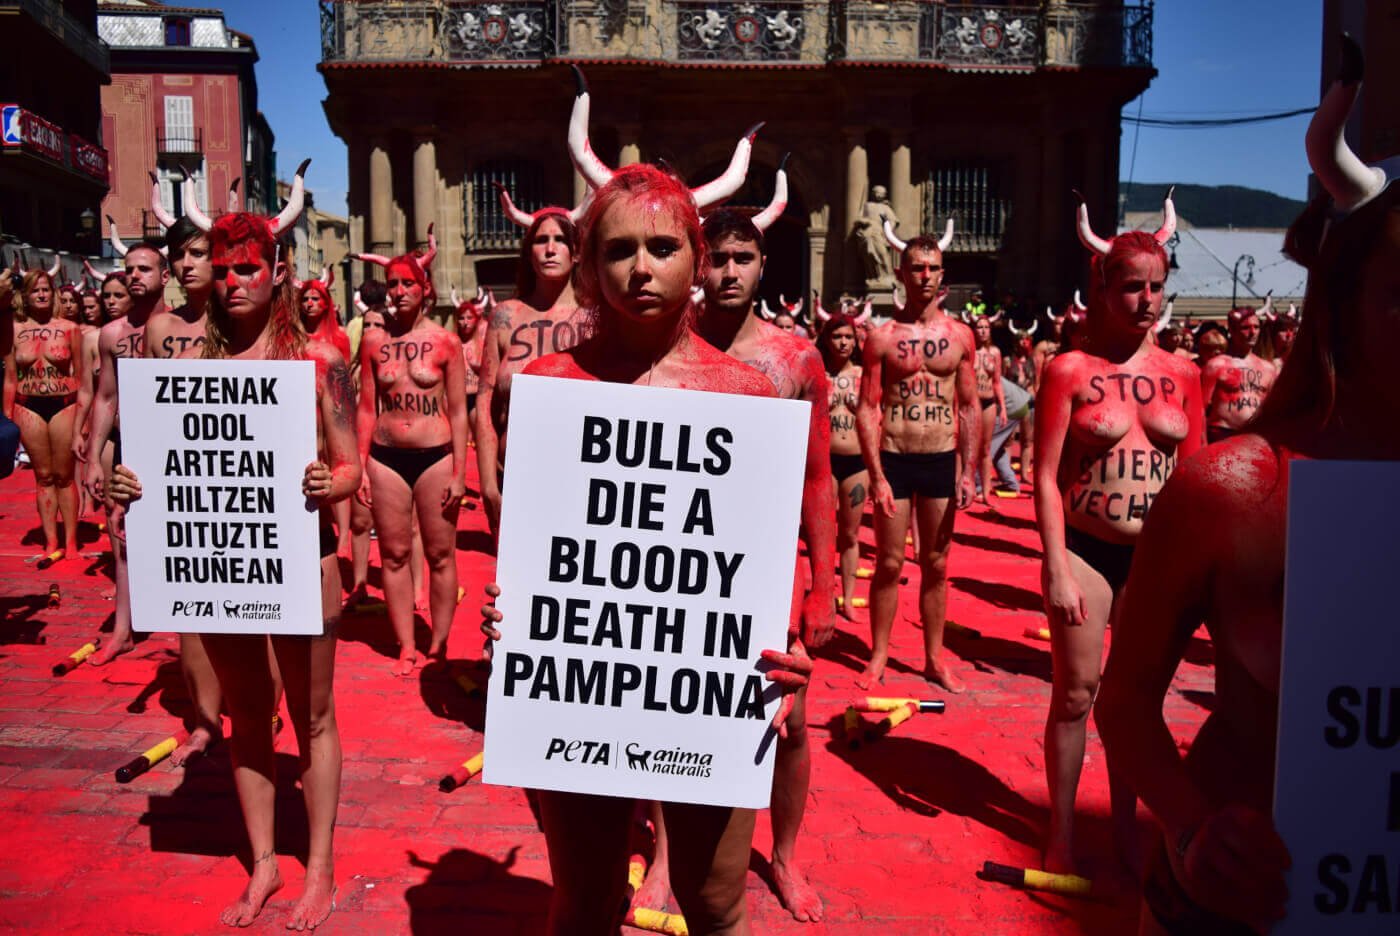 Nearly naked protestors covered in fake blood wearing bull horns